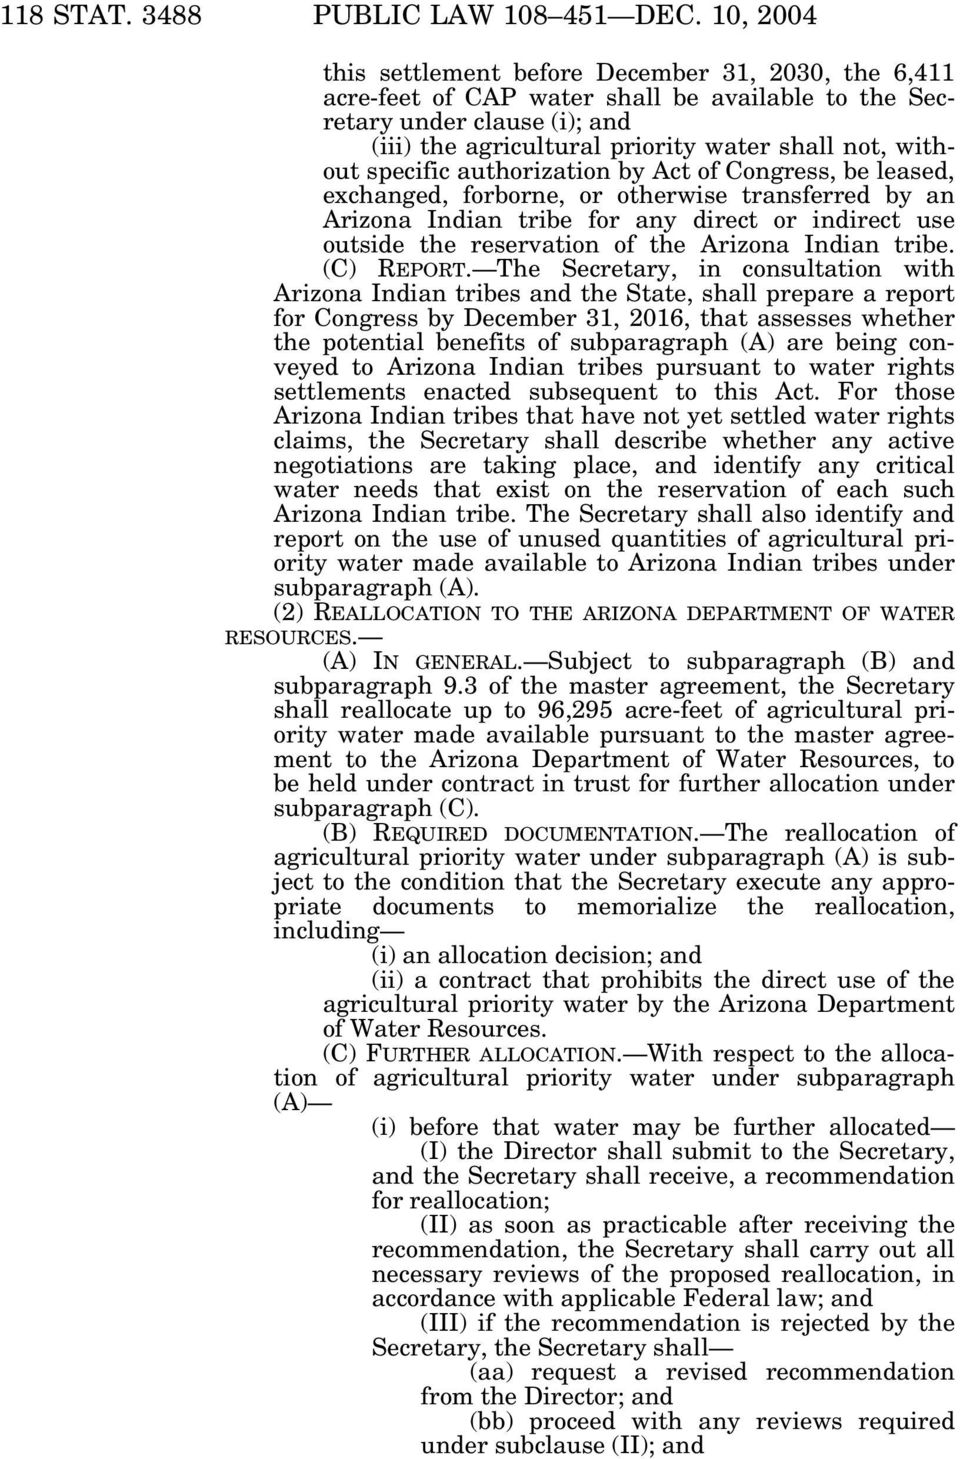 specific authorization by Act of Congress, be leased, exchanged, forborne, or otherwise transferred by an Arizona Indian tribe for any direct or indirect use outside the reservation of the Arizona